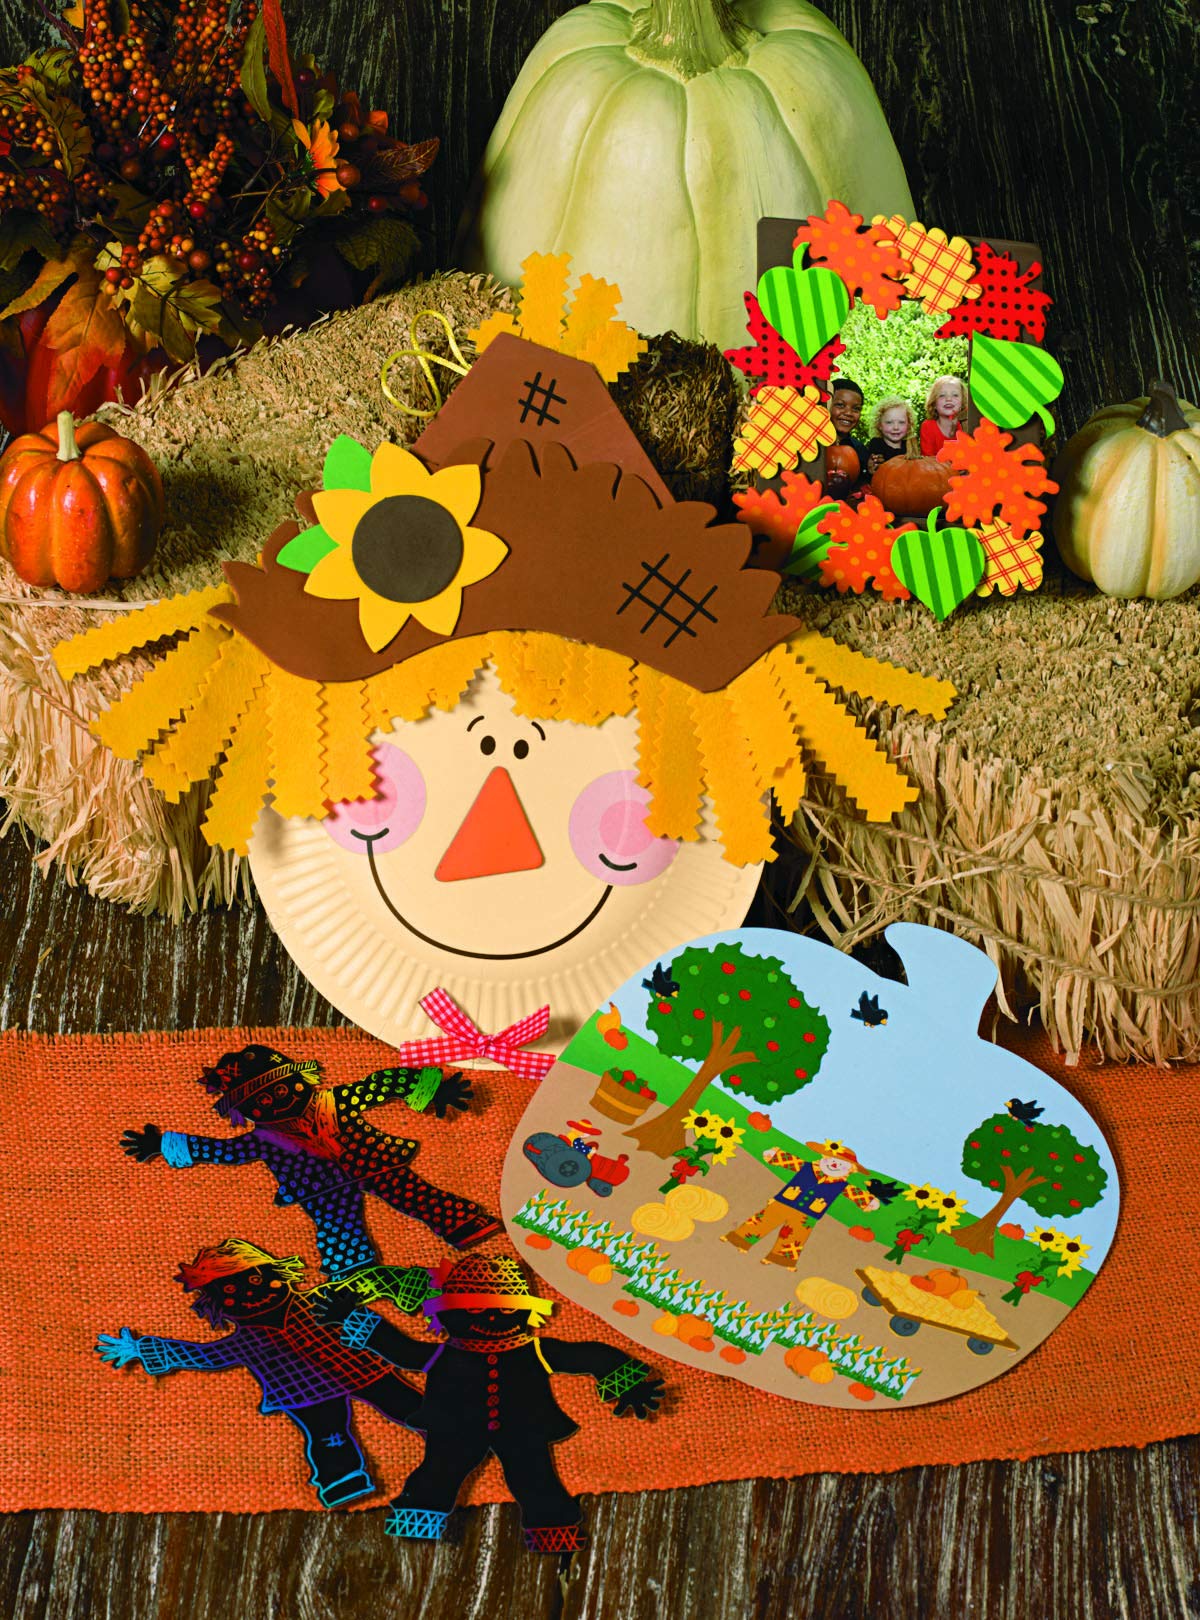 Paper Plate Scarecrow Craft Kit - Makes 12 - Fall Crafts for Kids and Fun Home Activities